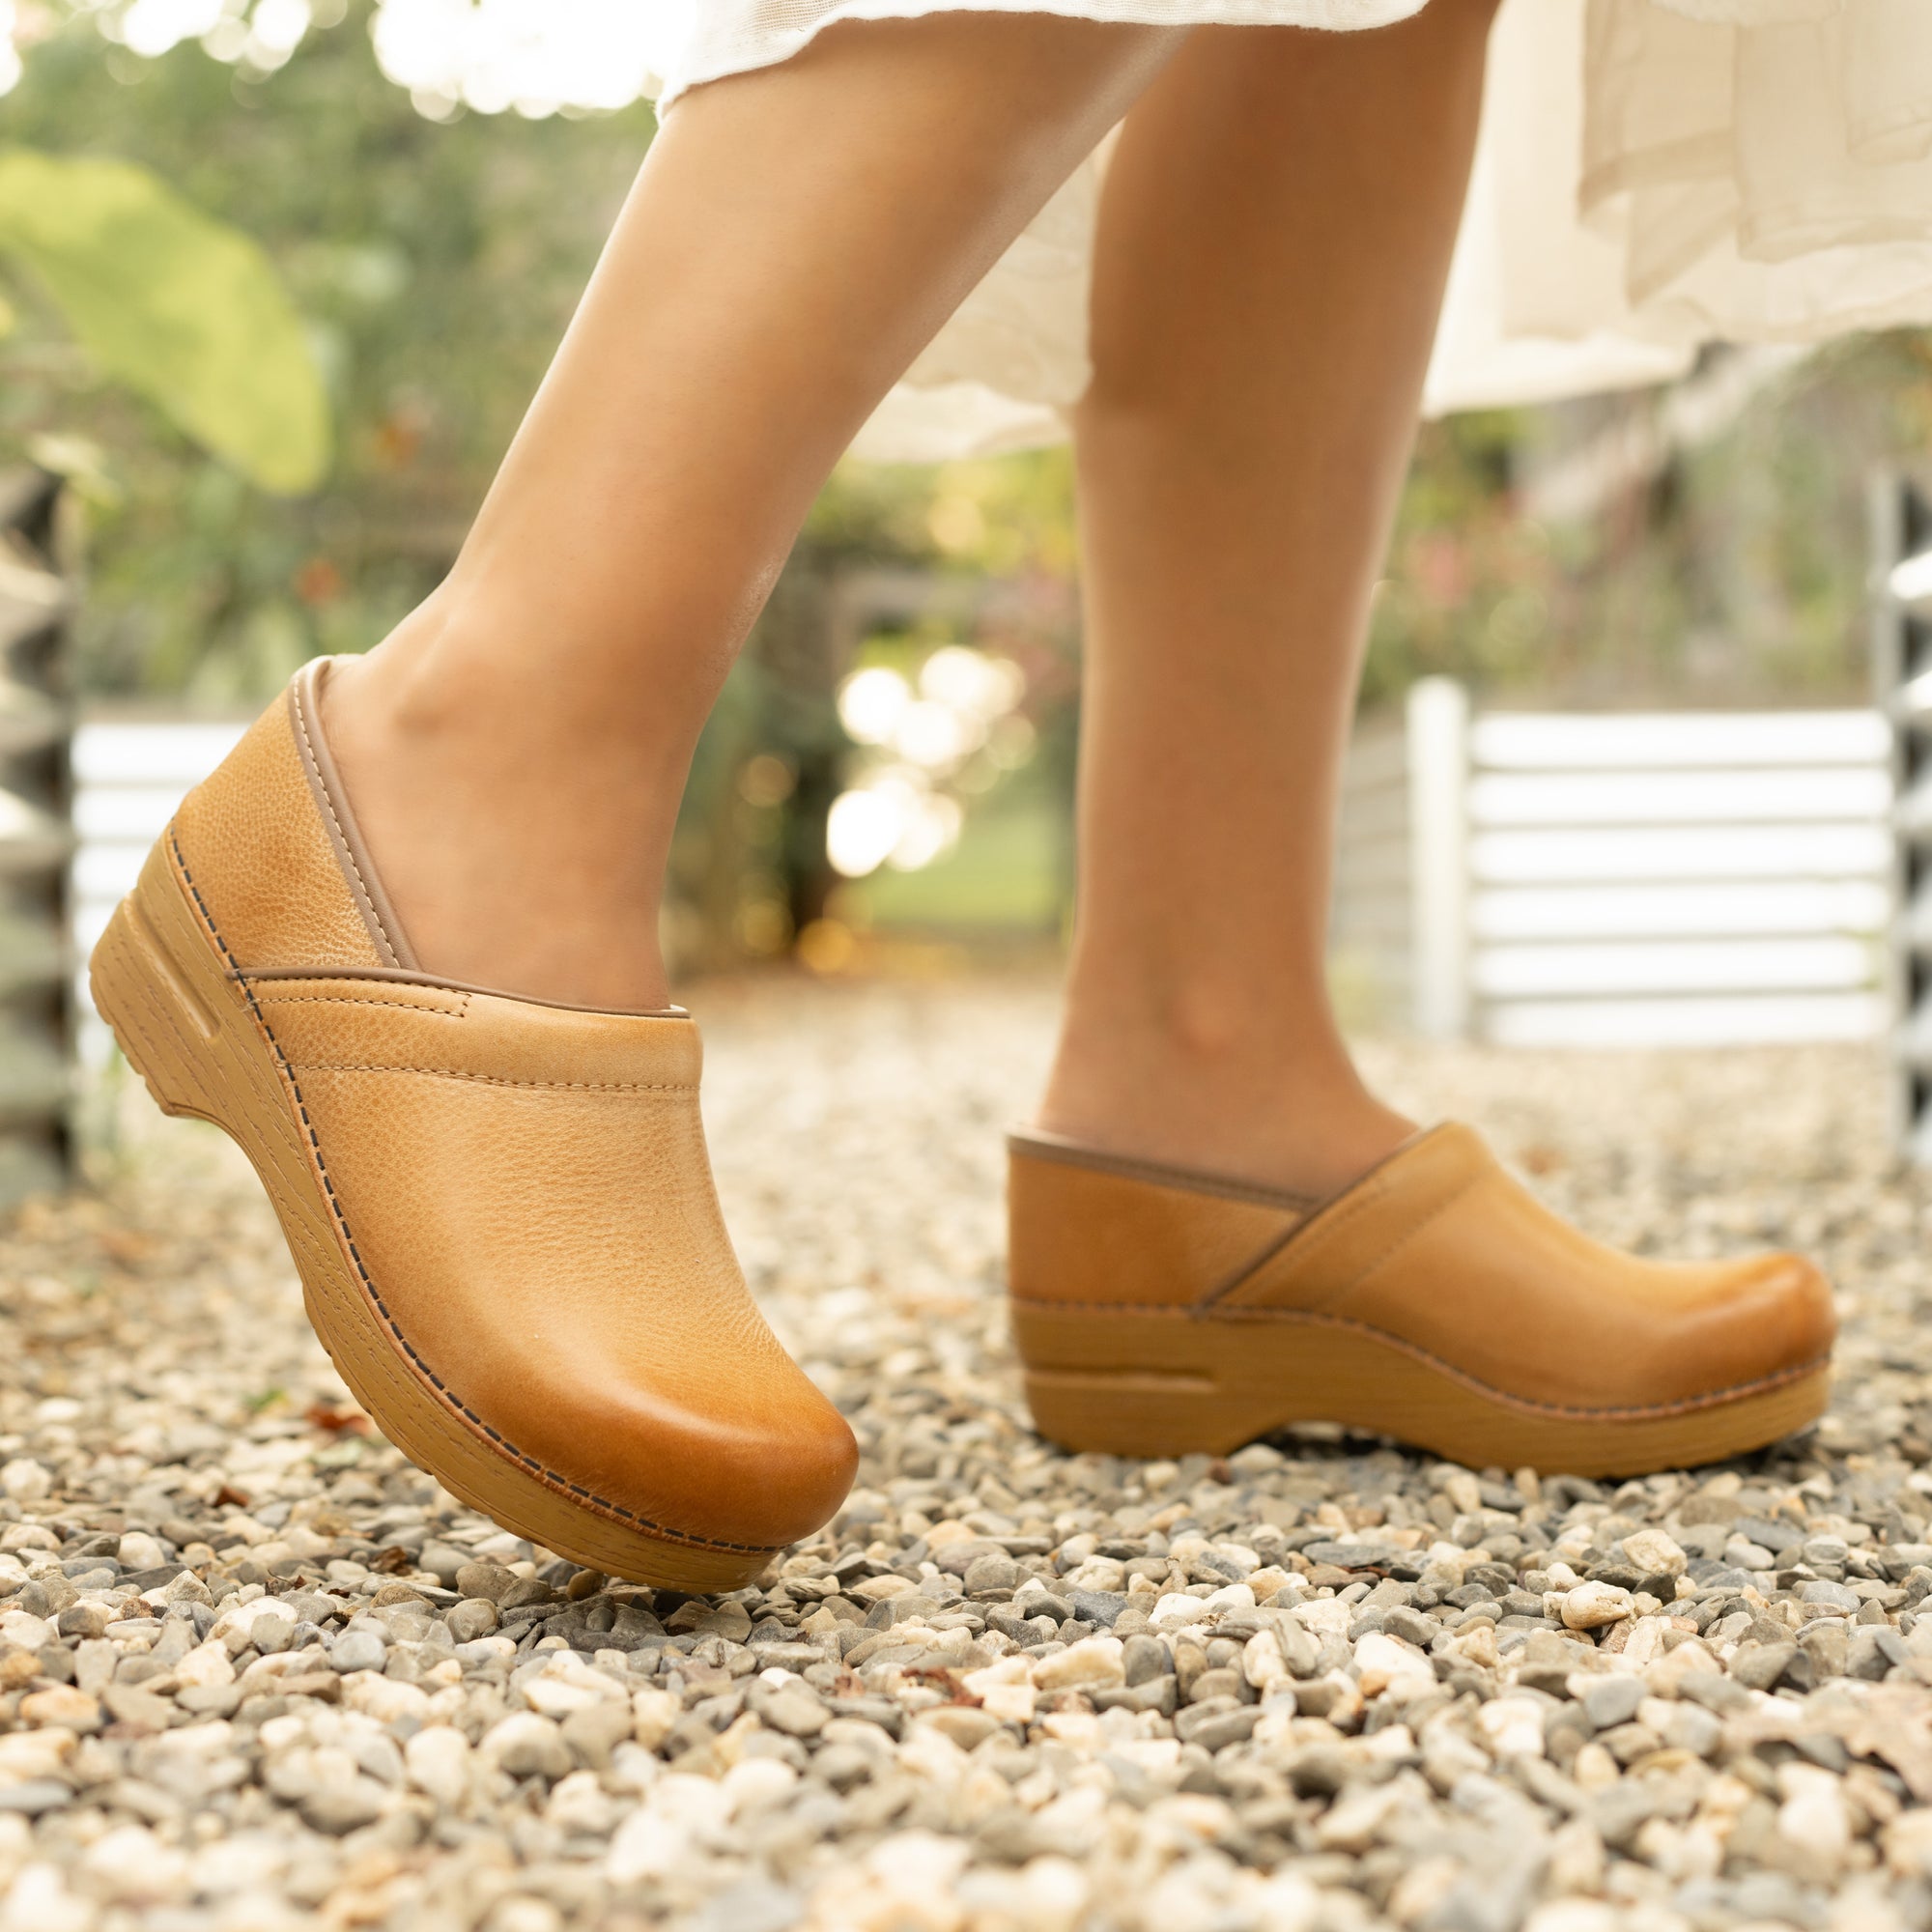 Light brown clogs shown in playful motion.